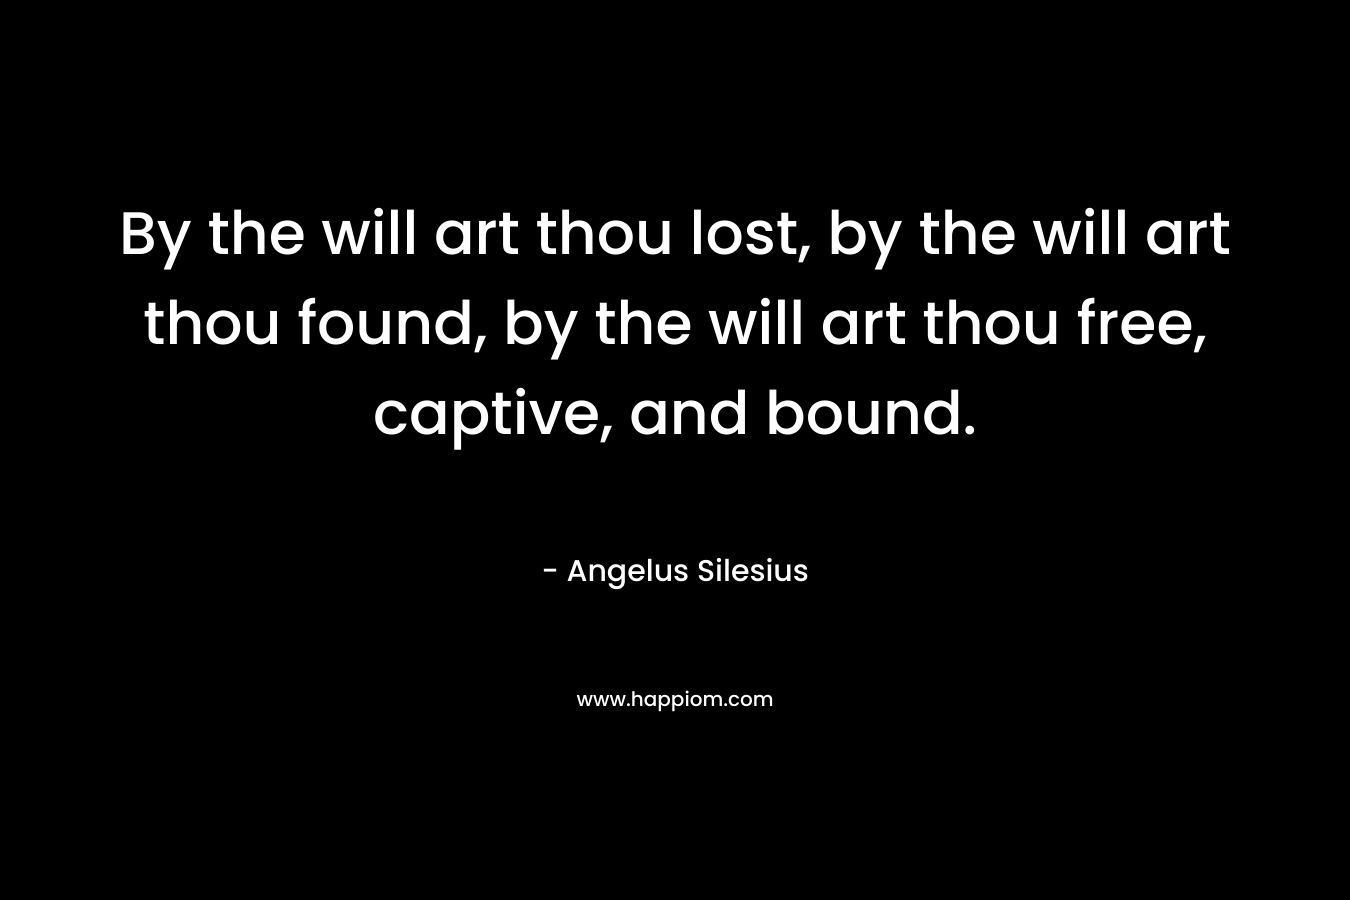 By the will art thou lost, by the will art thou found, by the will art thou free, captive, and bound. – Angelus Silesius